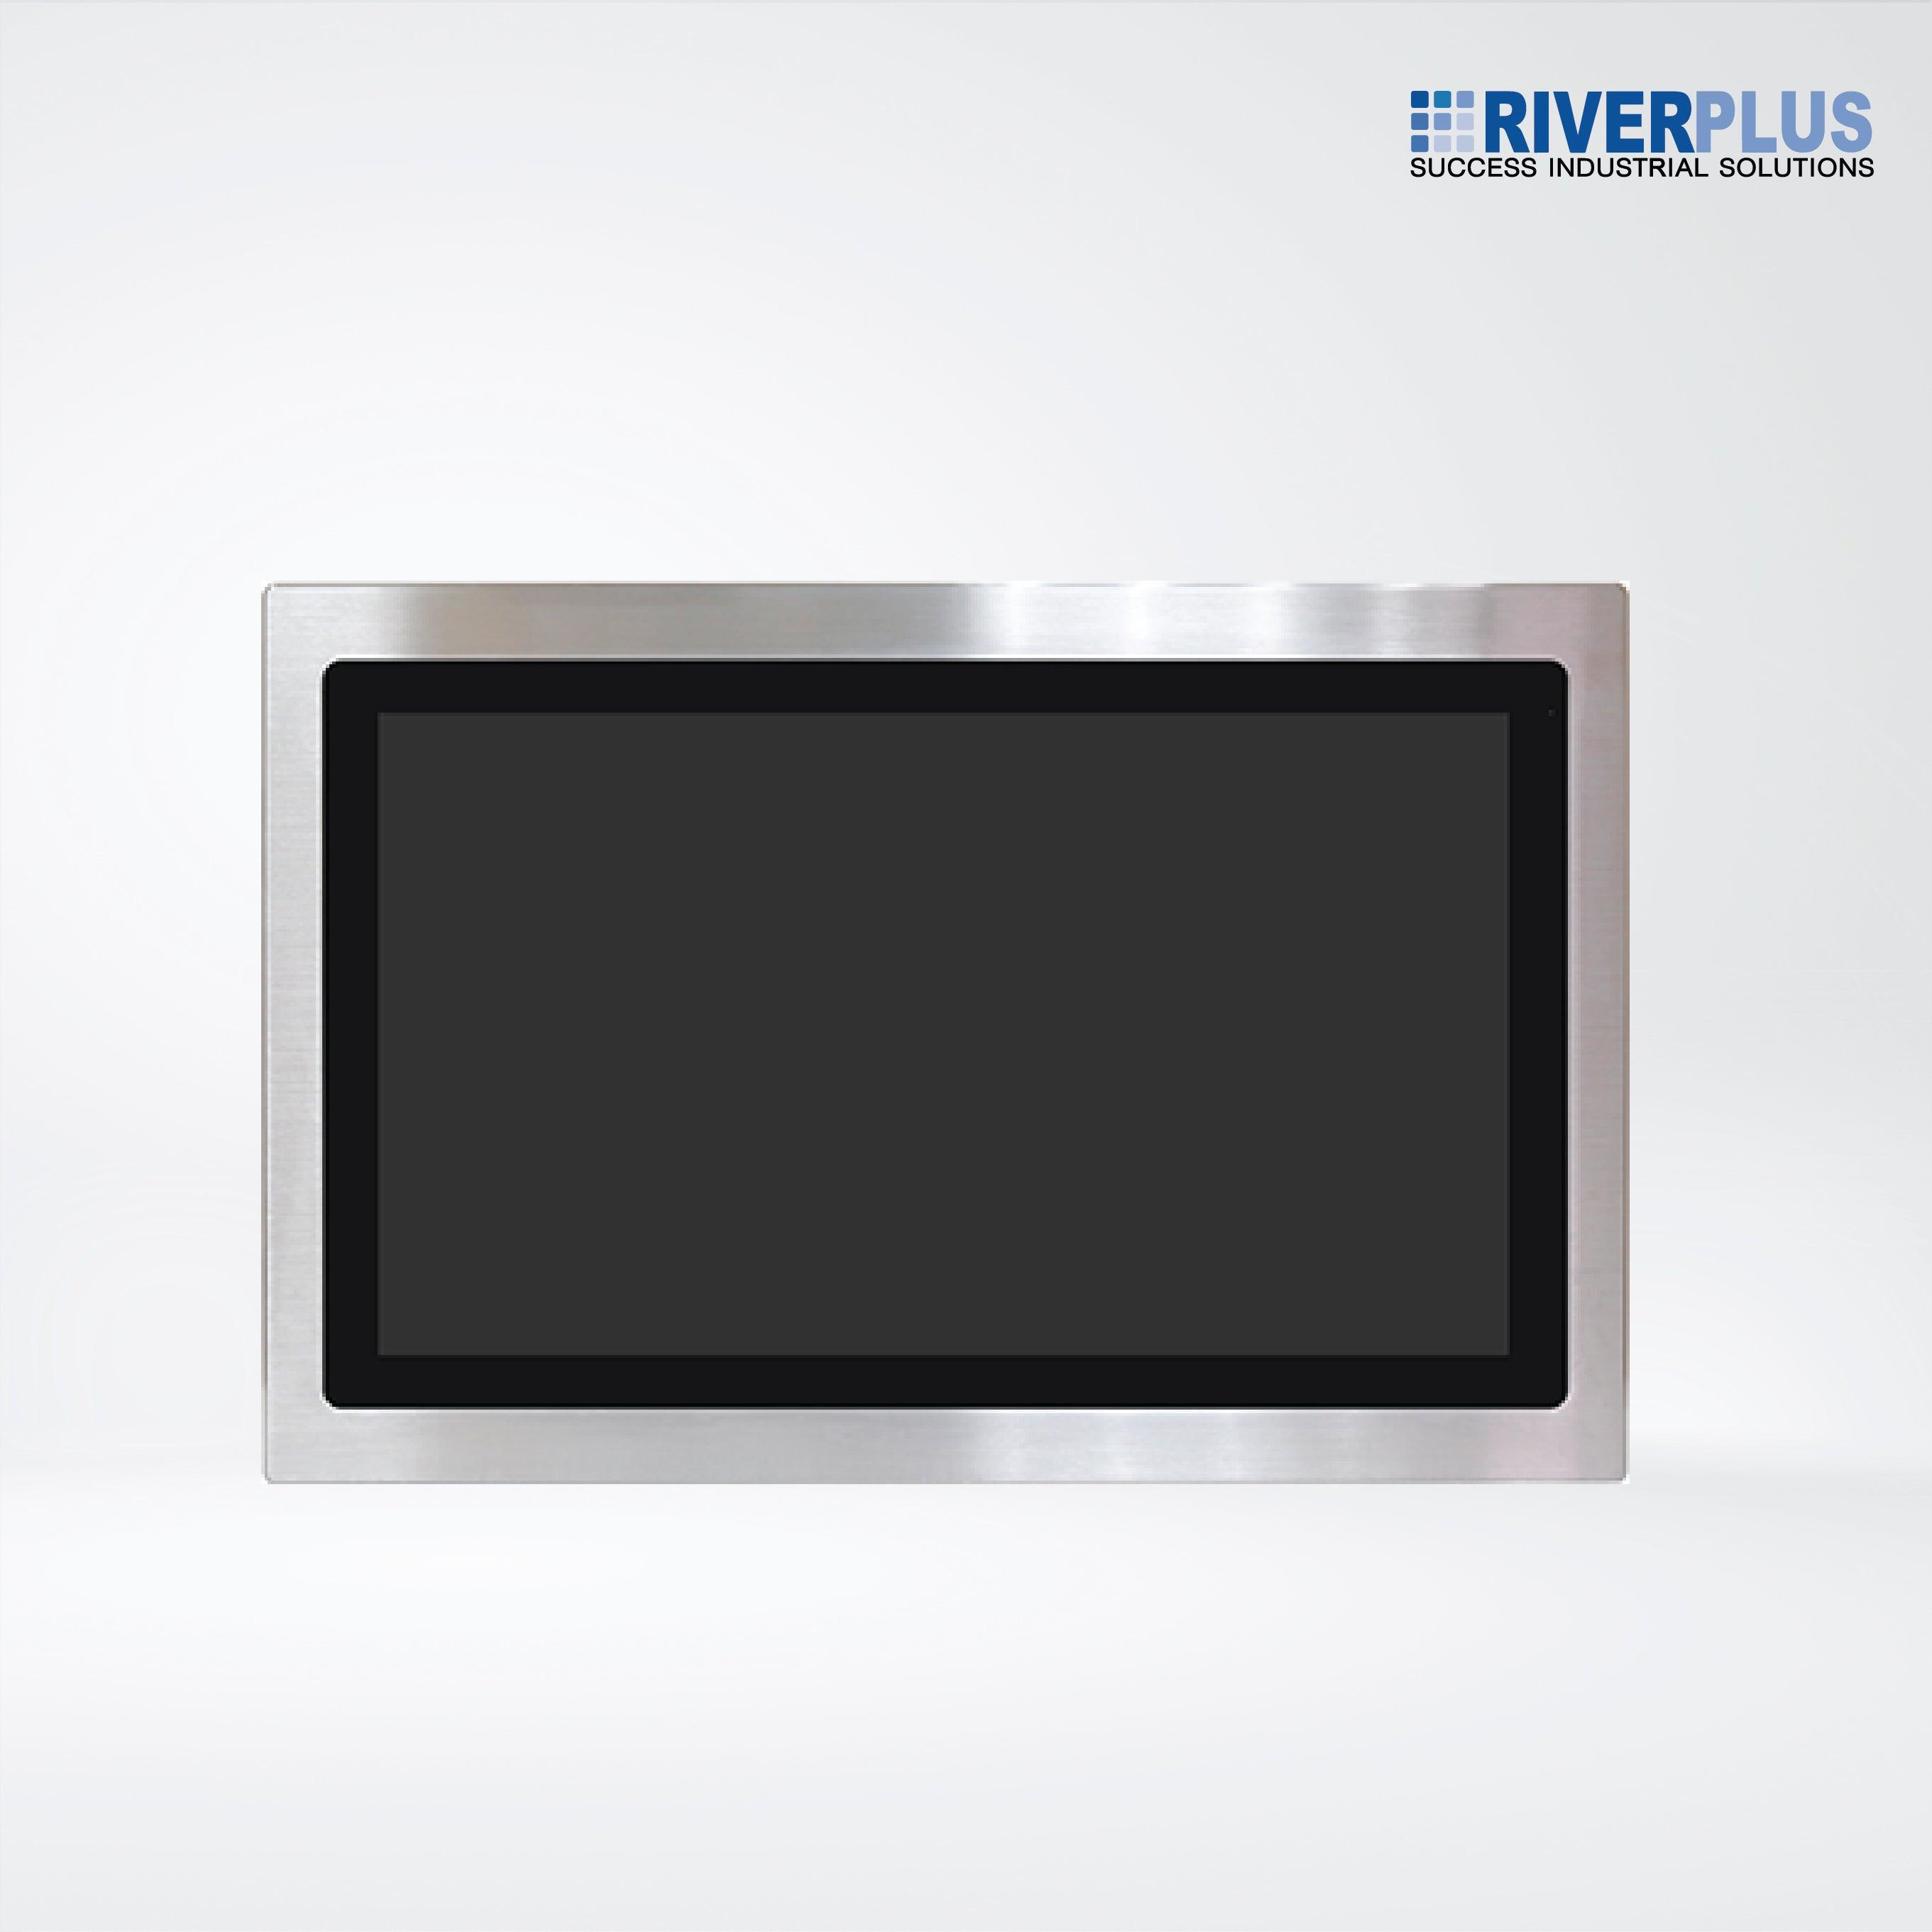 FABS-121R 21.5” Flat Front Panel IP66 Stainless Chassis Display - Riverplus